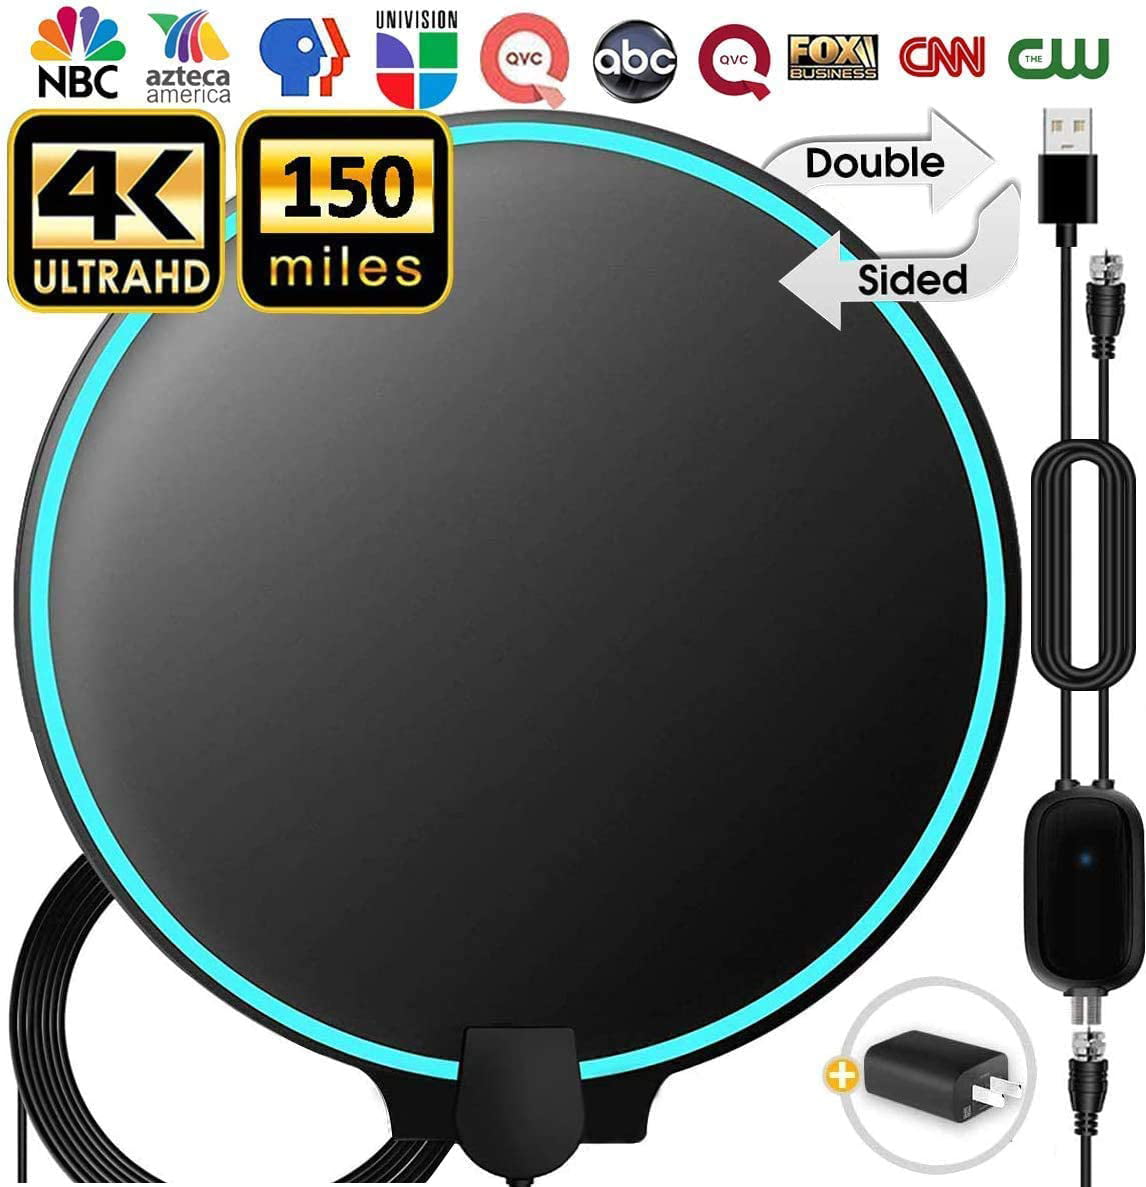 Amplified Digital Indoor TV Antenna Supports 4K Free Channels etc 1080P HD 80 Miles Indoor HDTV Antenna Digital TV Antenna with Signal Amplifier